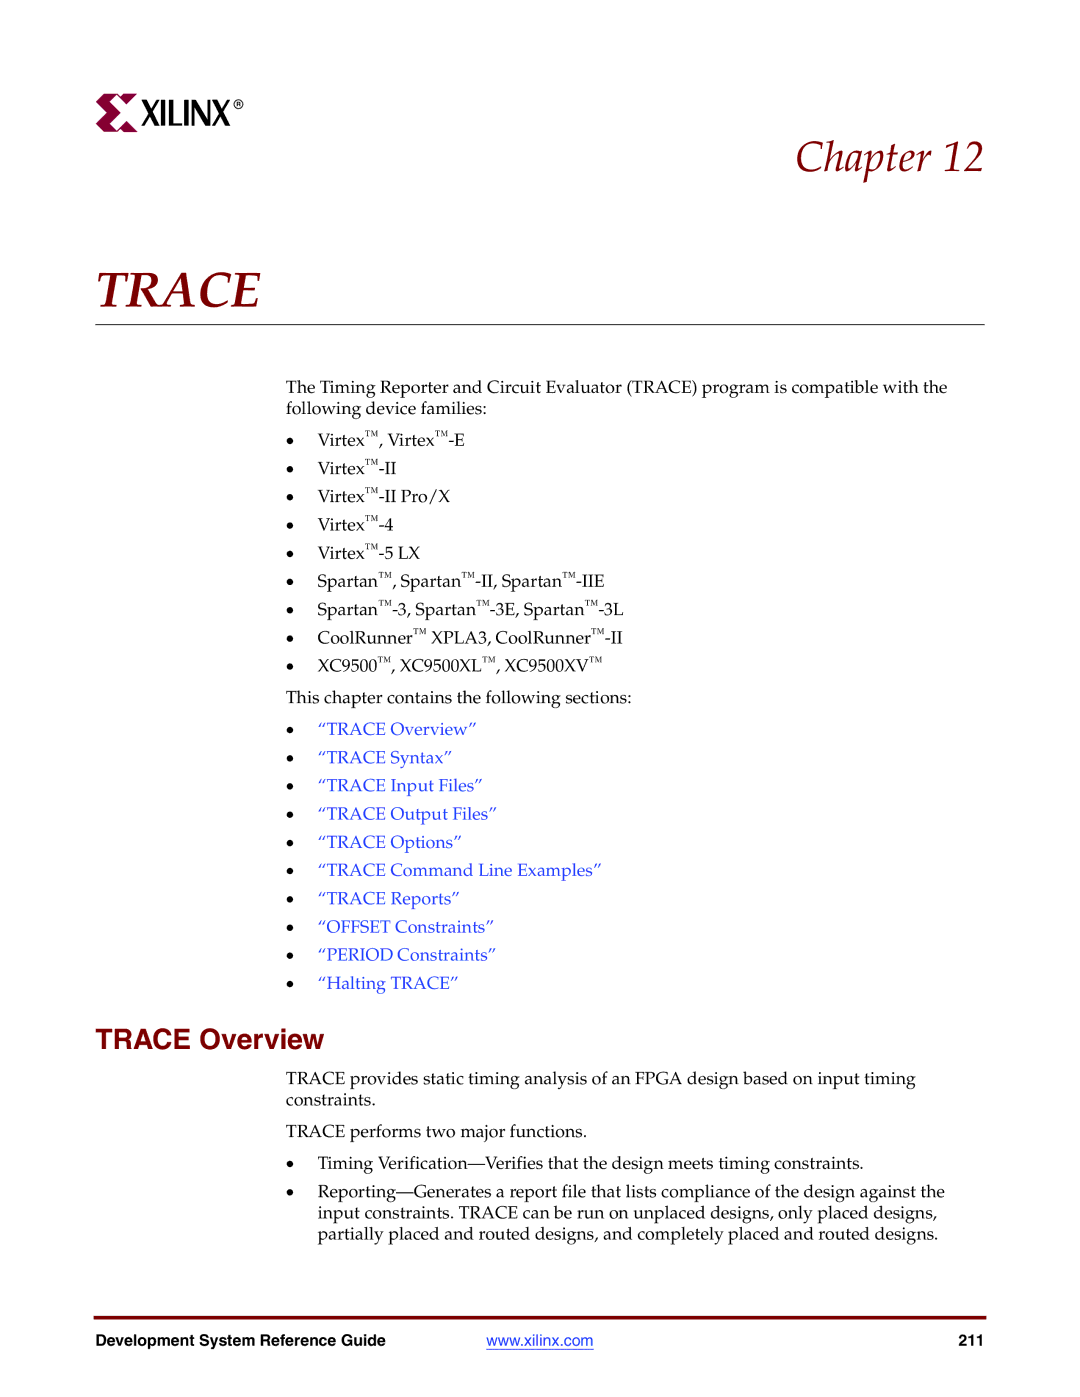 Xilinx 8.2i manual Trace Overview 